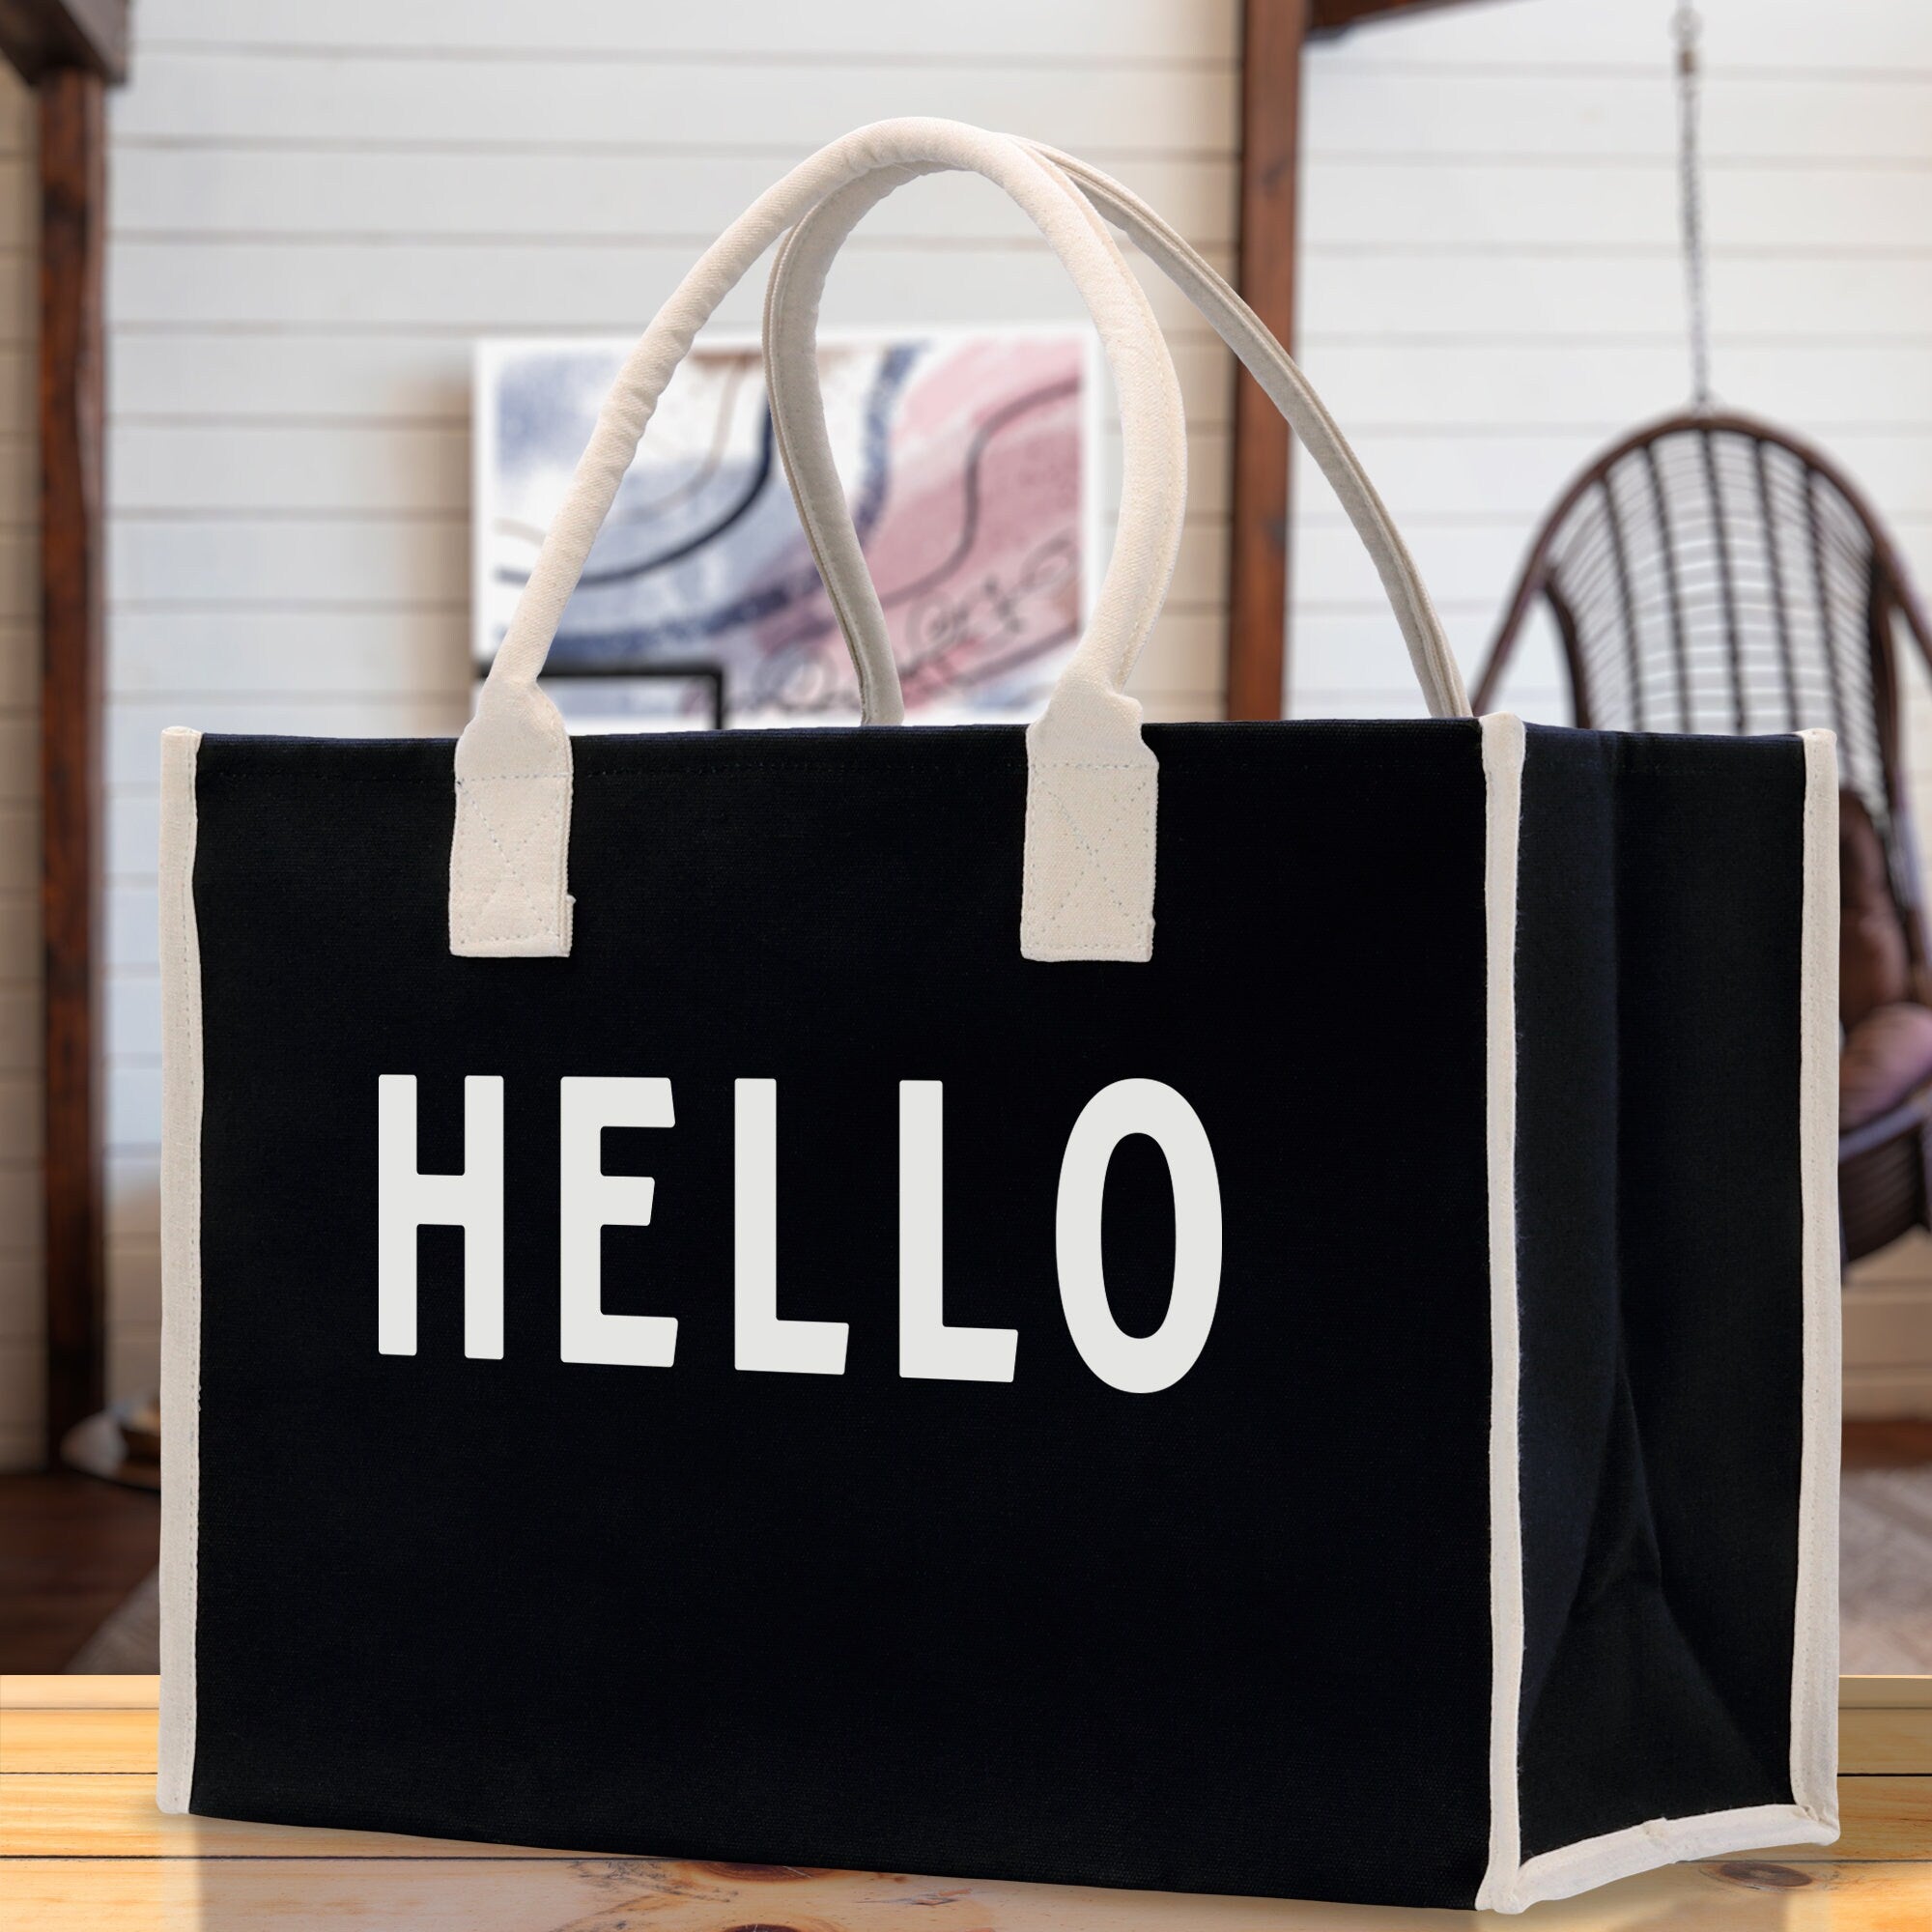 Hello Cotton Canvas Chic Beach Tote Bag Multipurpose Tote Weekender Tote Gift for Her Outdoor Tote Vacation Tote Large Beach Bag